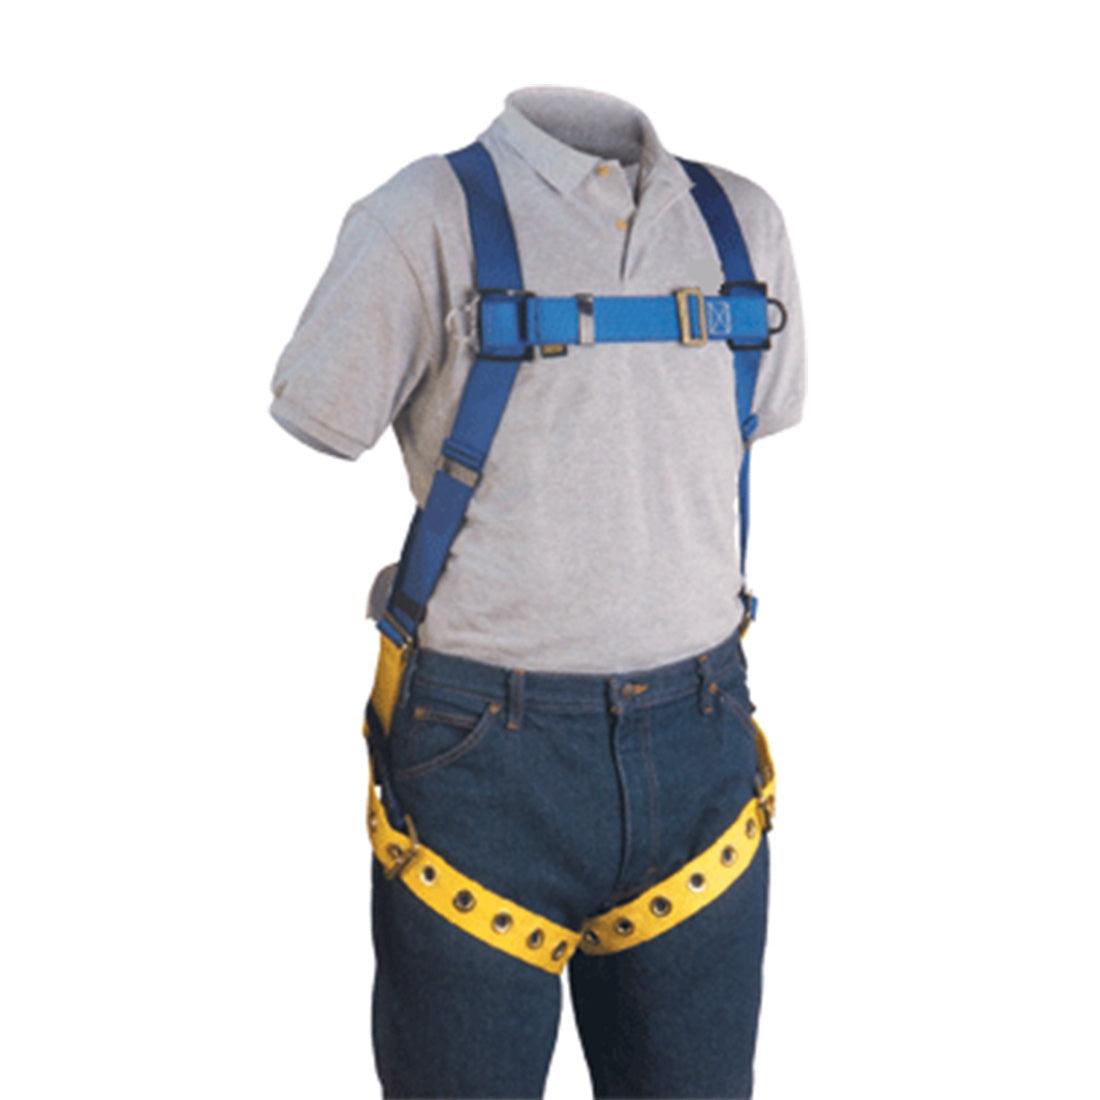 MIO Tongue Buckle Harness - 832 Series - Main Product View